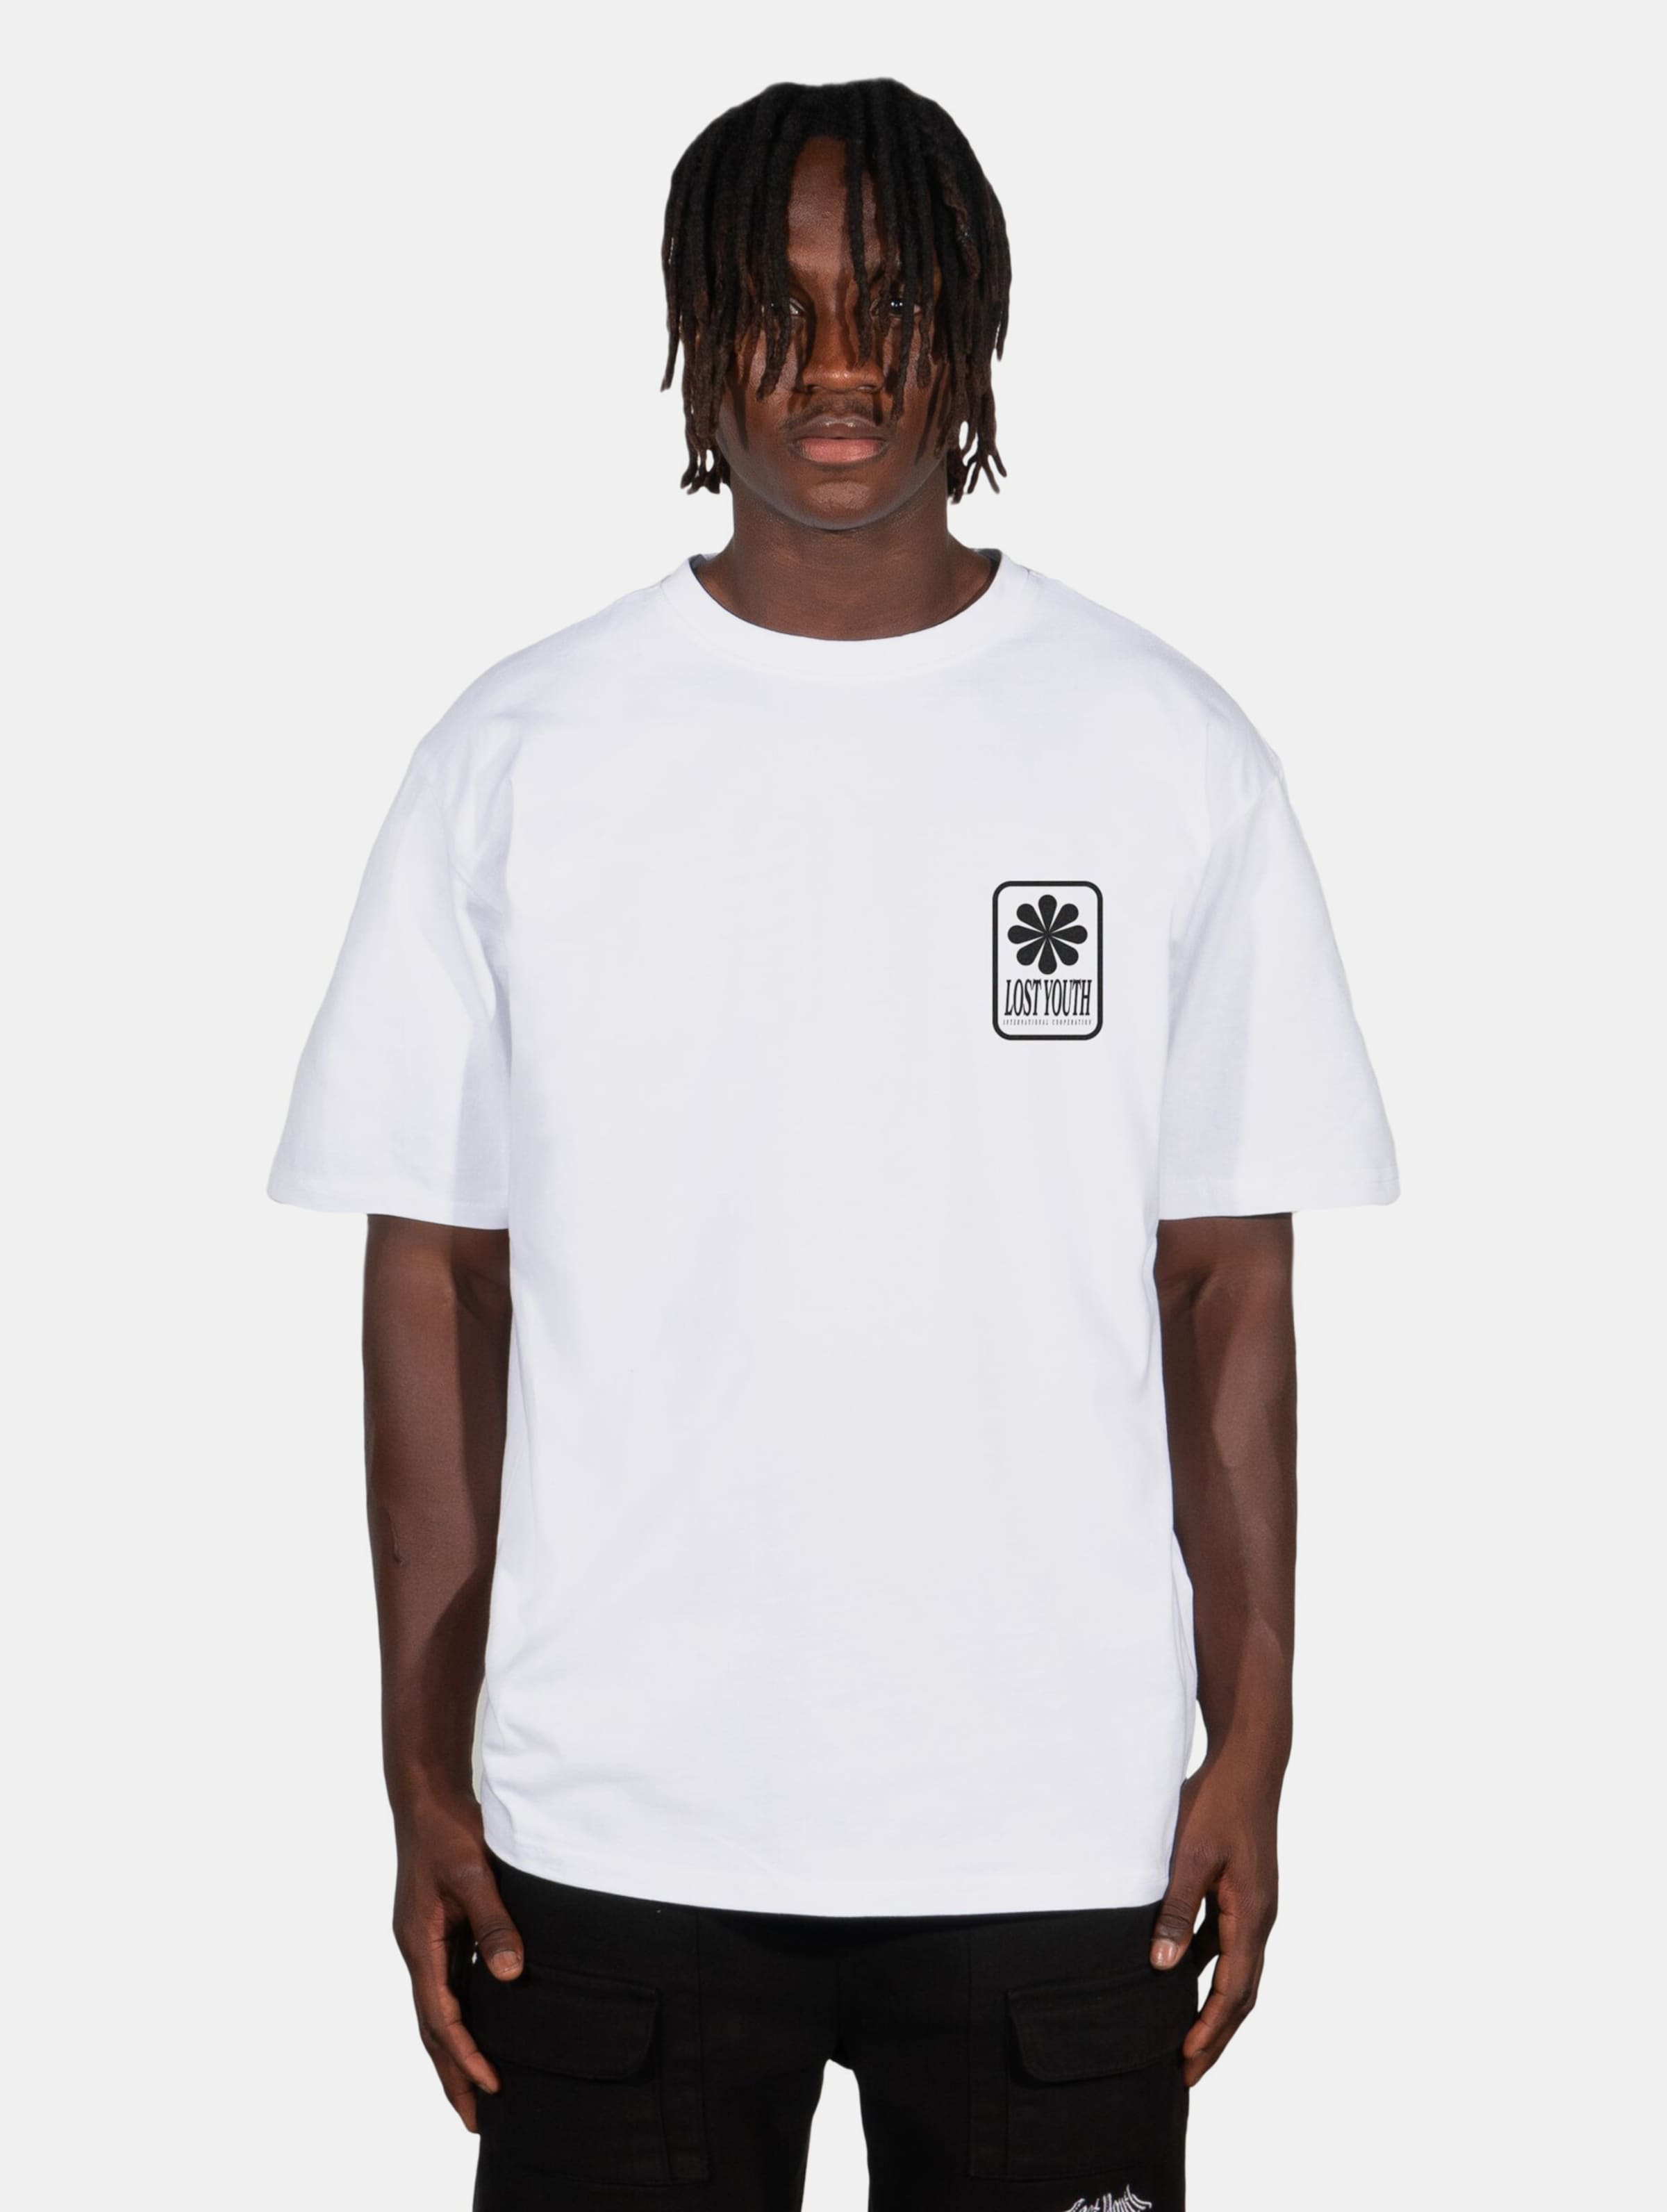 Lost Youth LY TEE- ICON V.4 Männer,Unisex op kleur wit, Maat XL